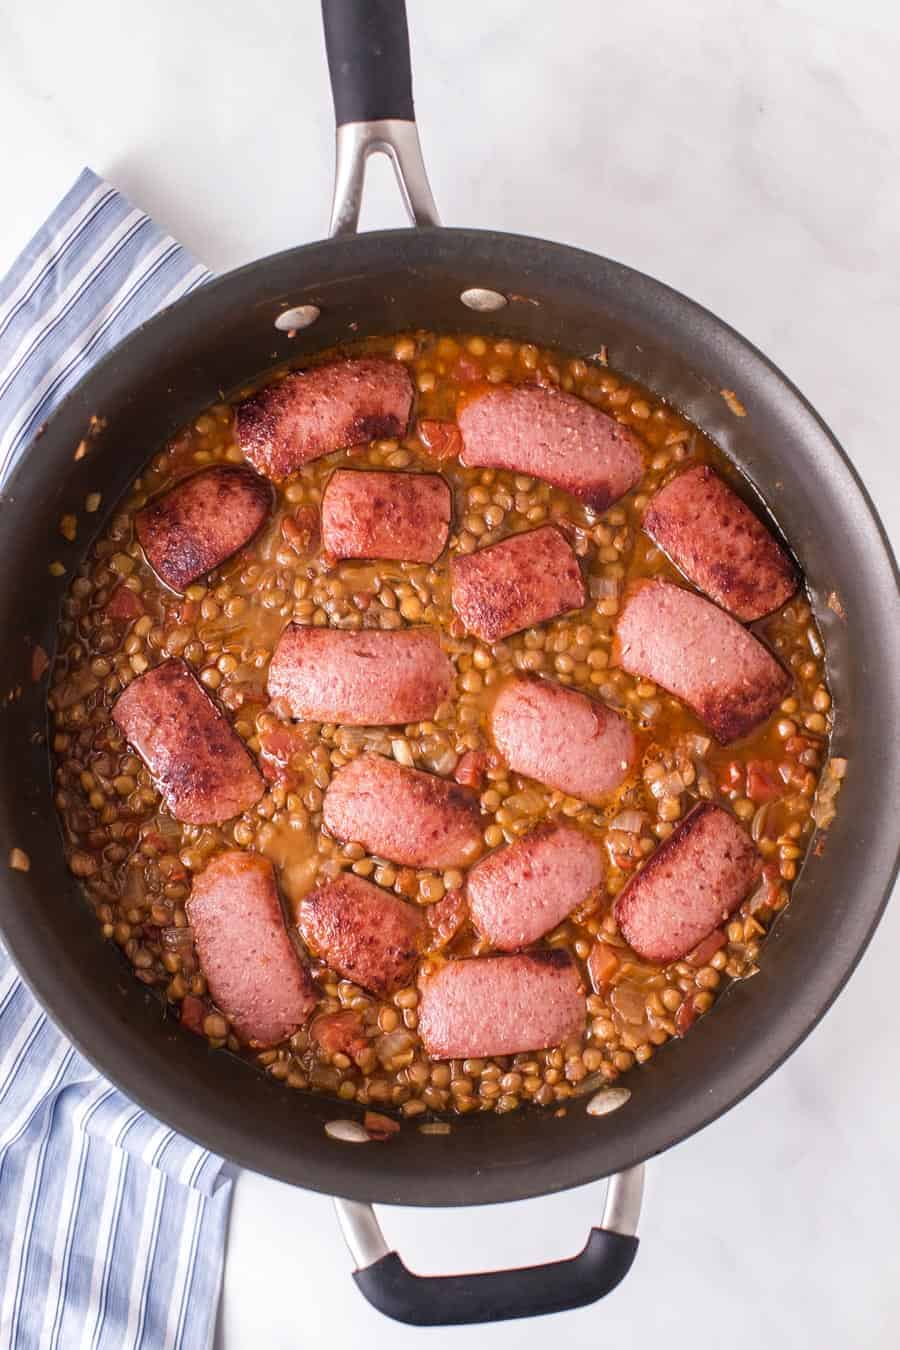 lentils cooking with link sausage that has been browned floating on top in a pan.